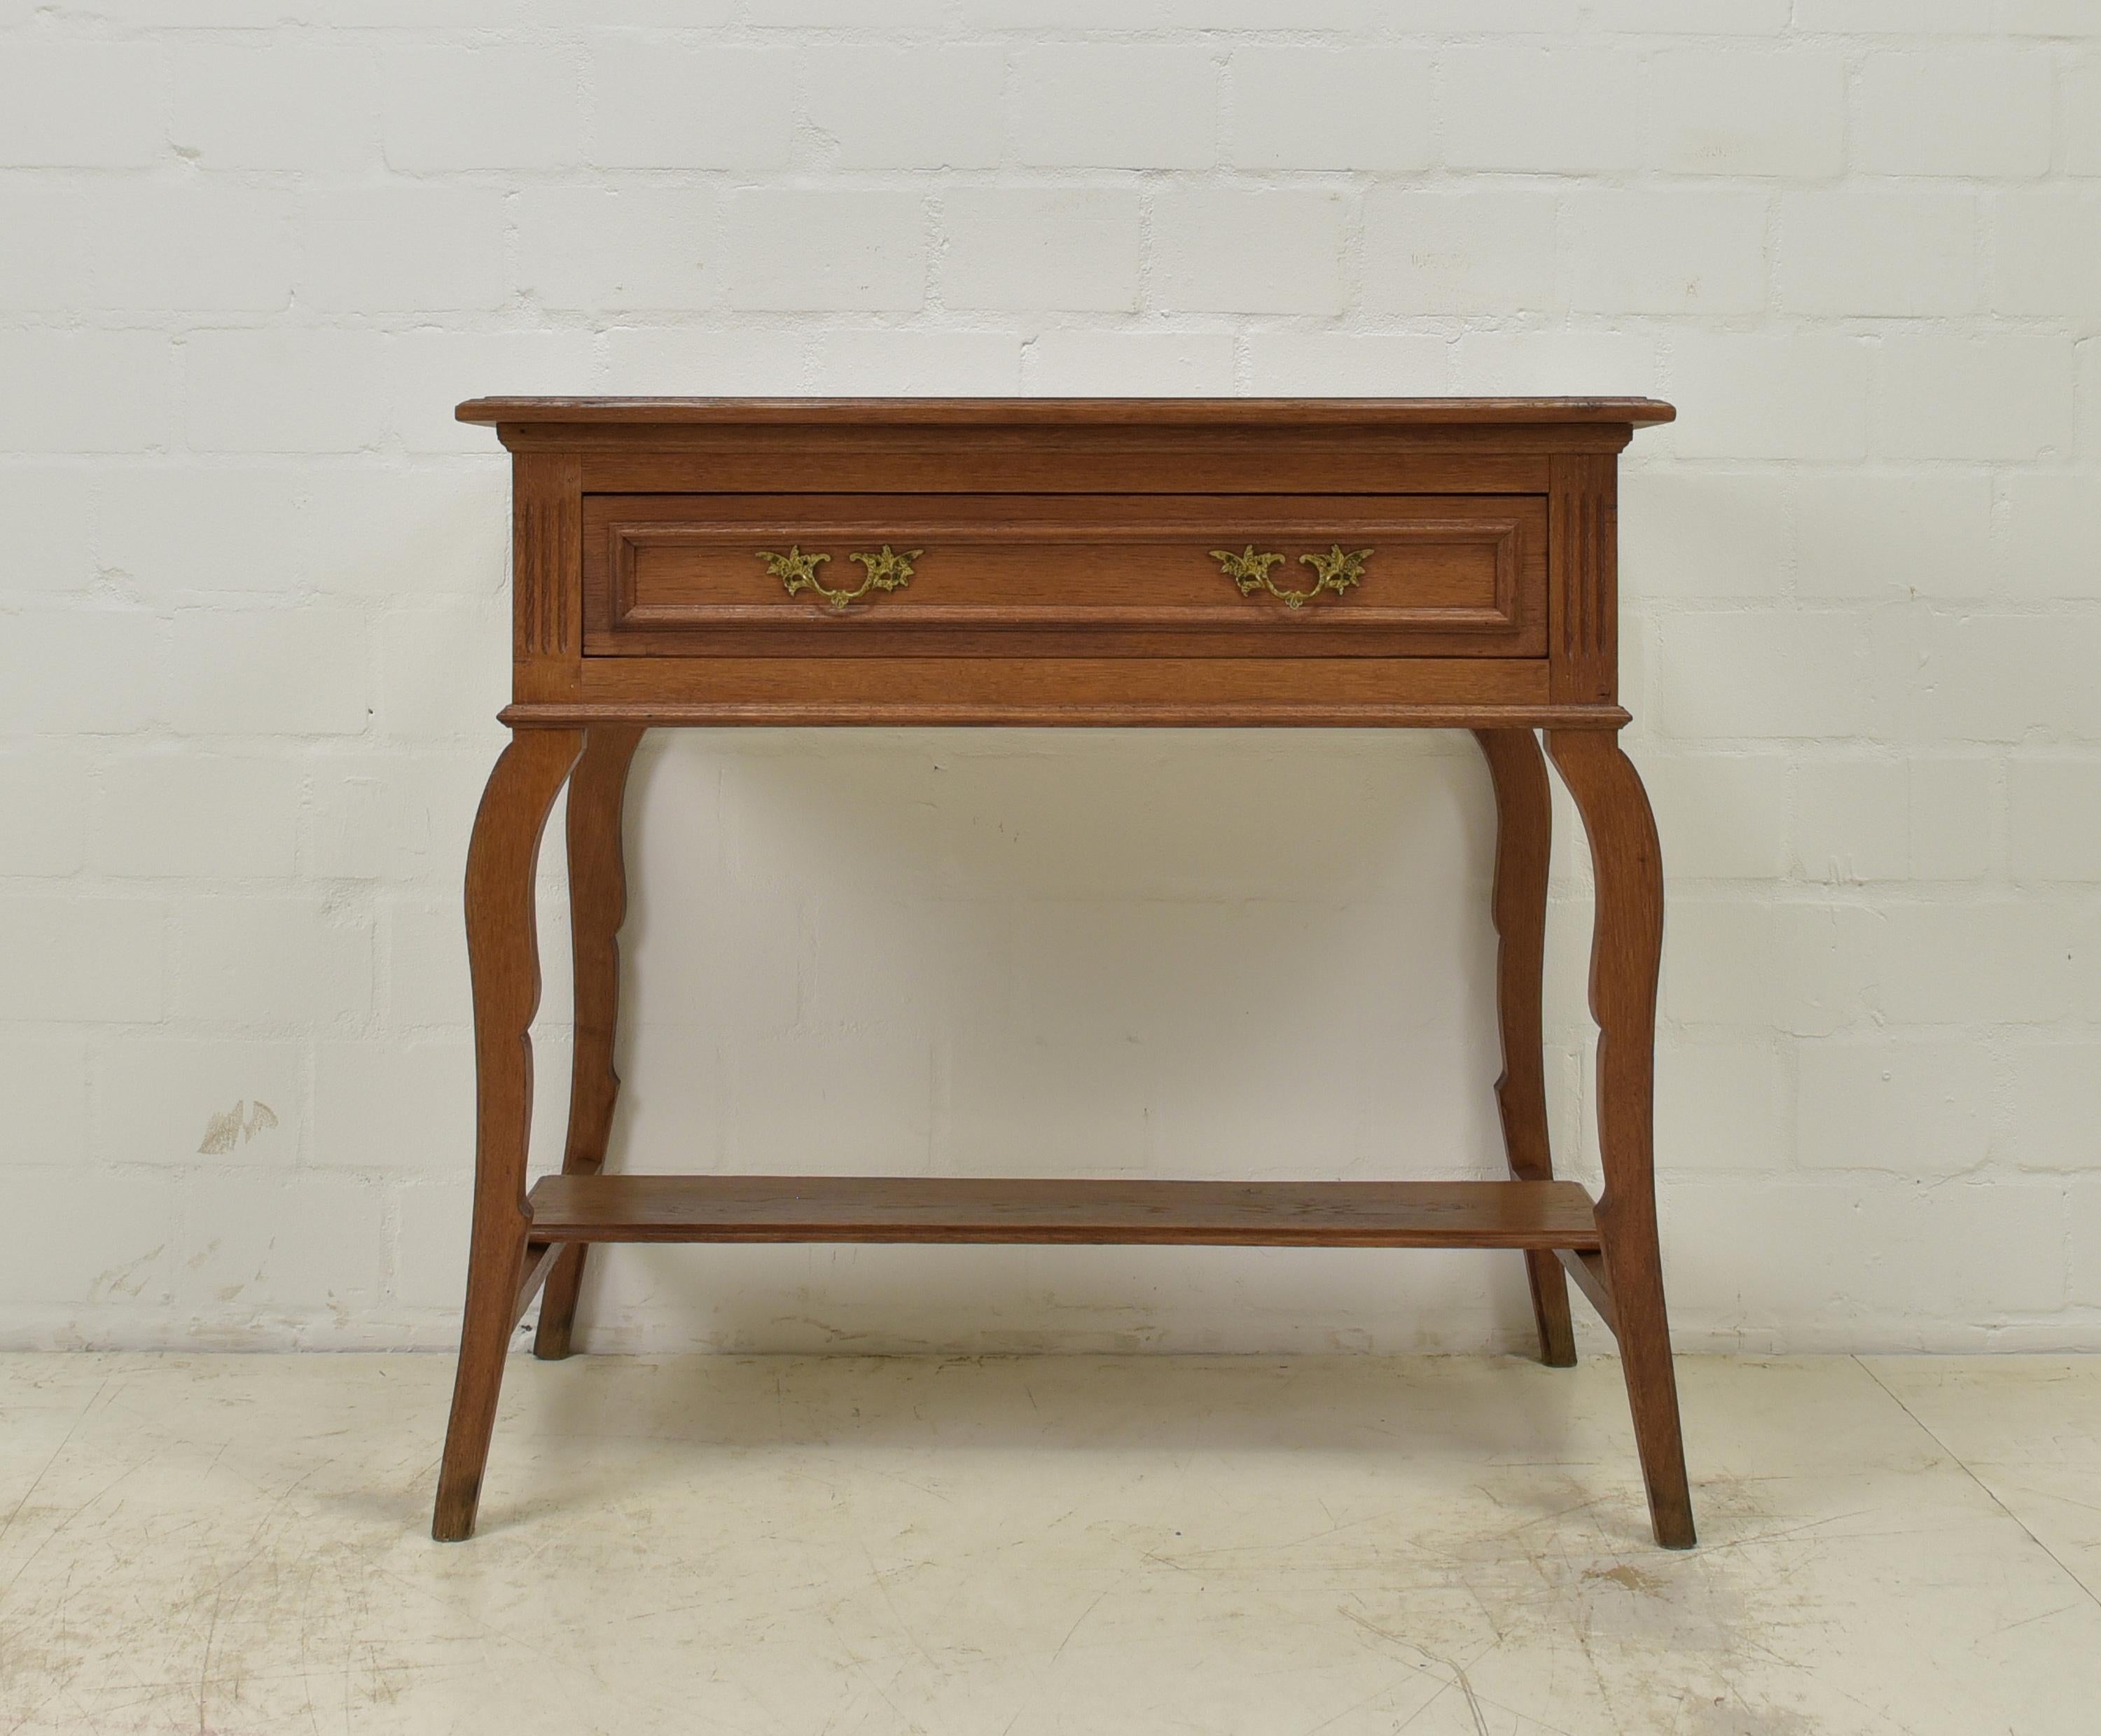 Small console table restored solid oak side cabinet wall table

Features:
High quality
Attractive, quite light color tone
Very nice condition
Rare model

Additional information:
Material: Almost entirely solid oak
Dimensions: 93 W x 57 D x